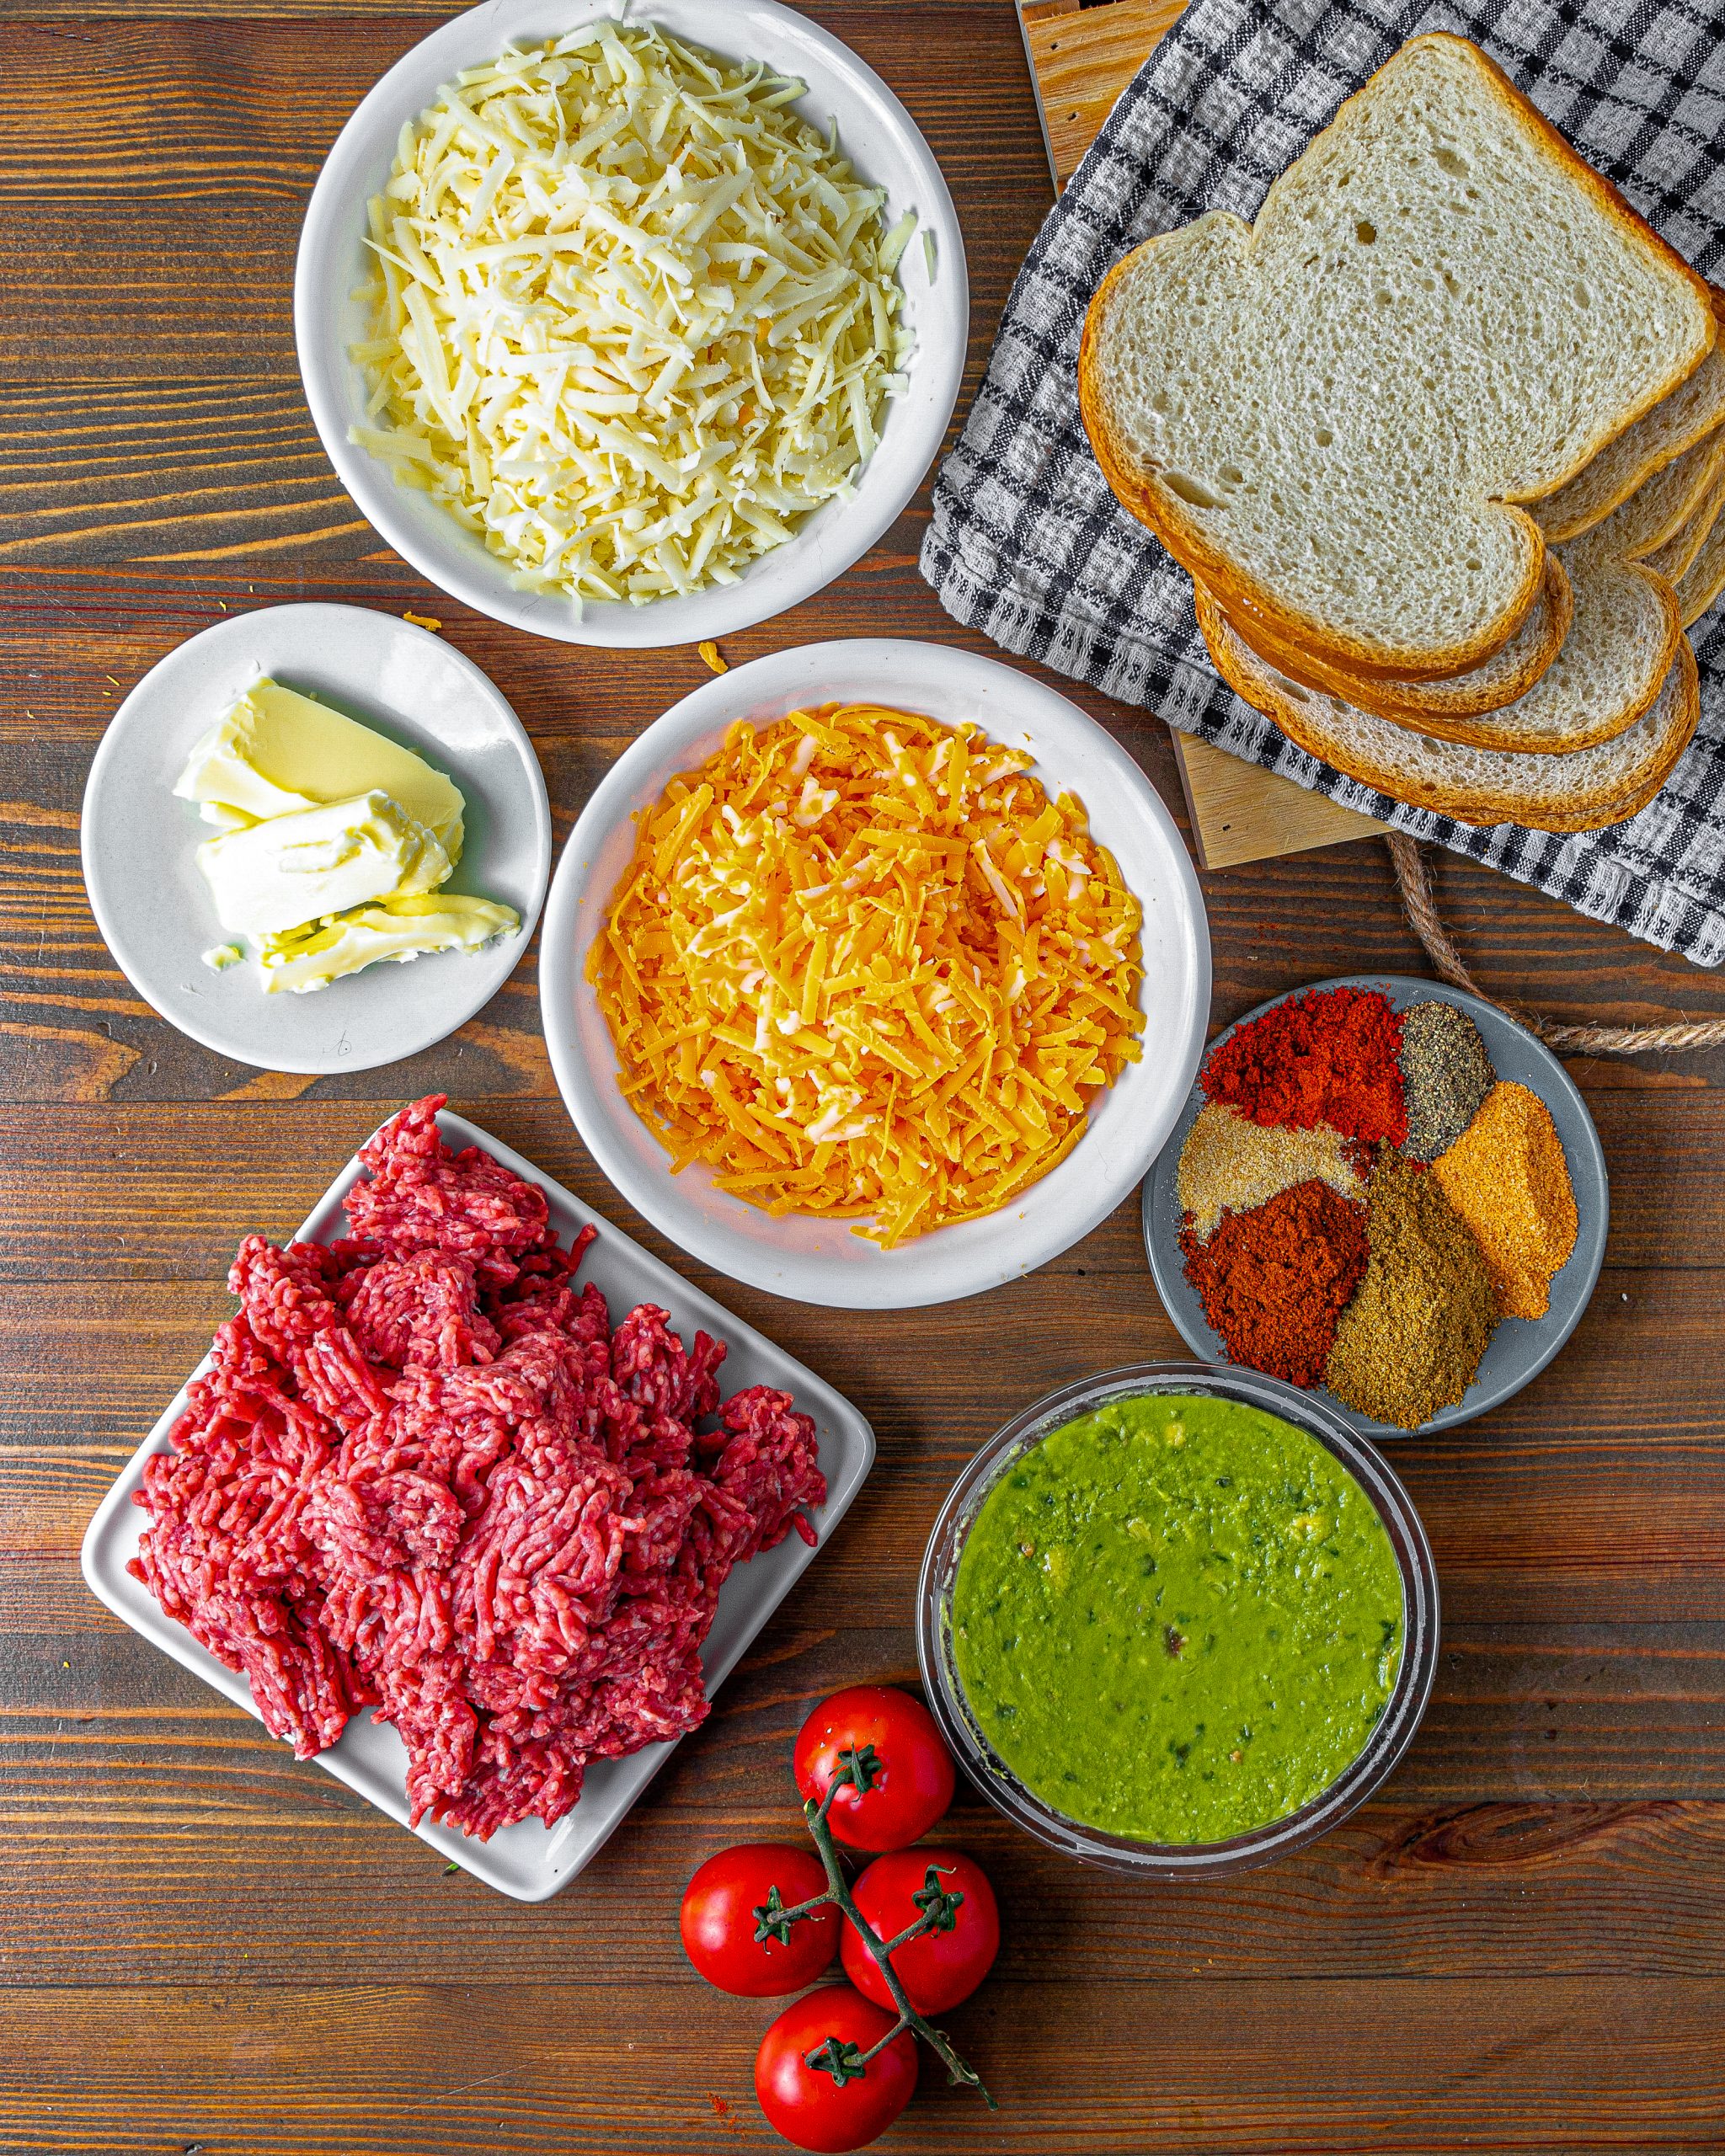 Taco Grilled Cheese Sandwich ingredients